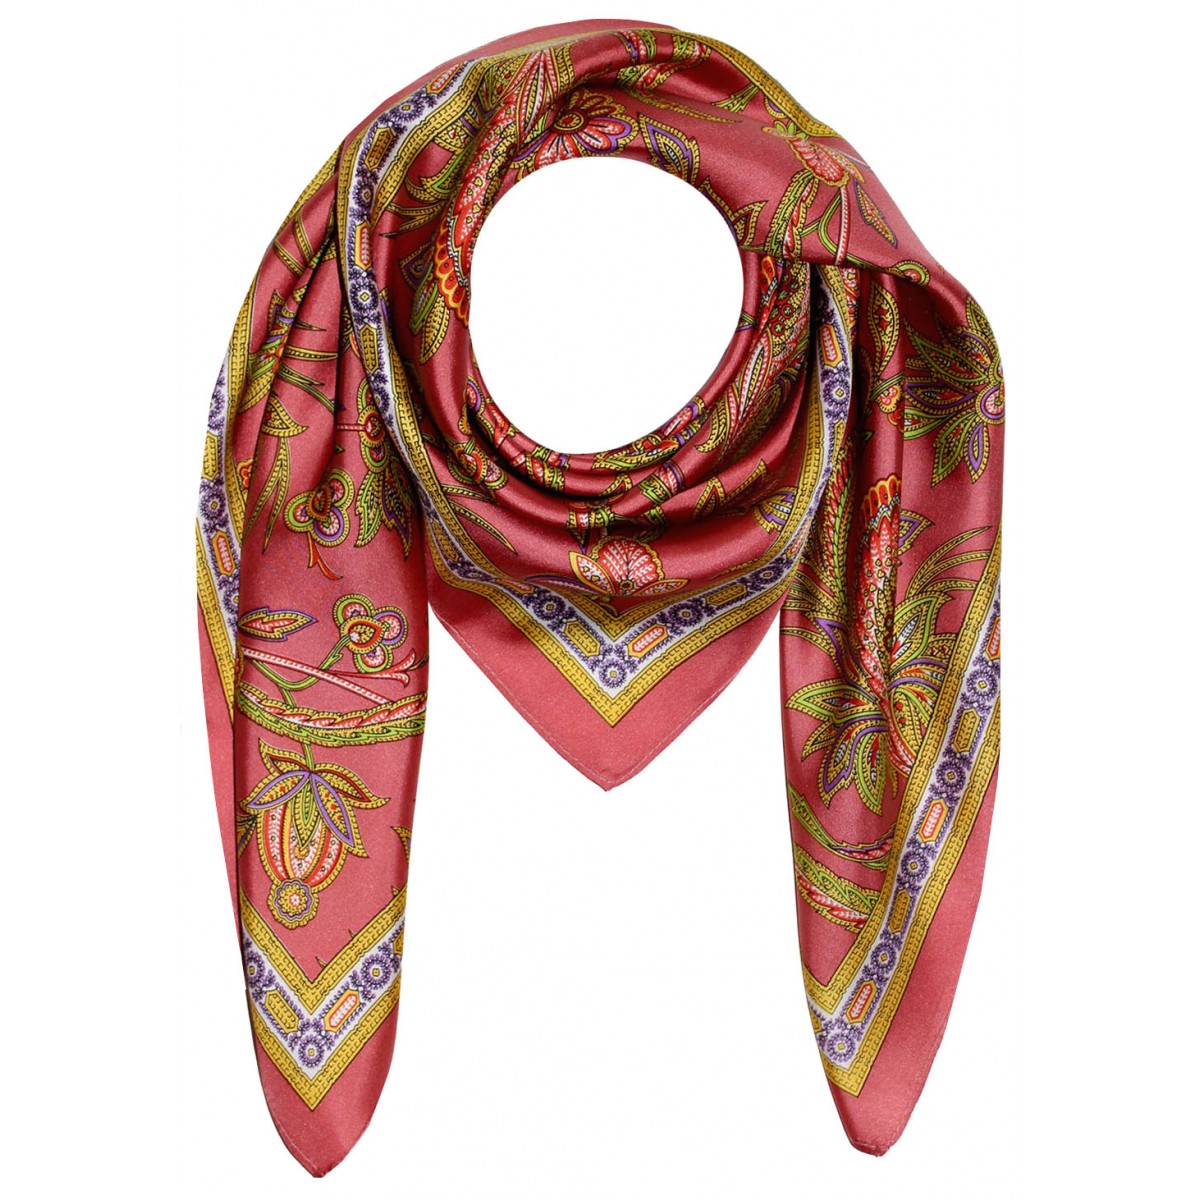 LORENZO CANA - The Official Online Store - Silk scarf Paisely in red ...